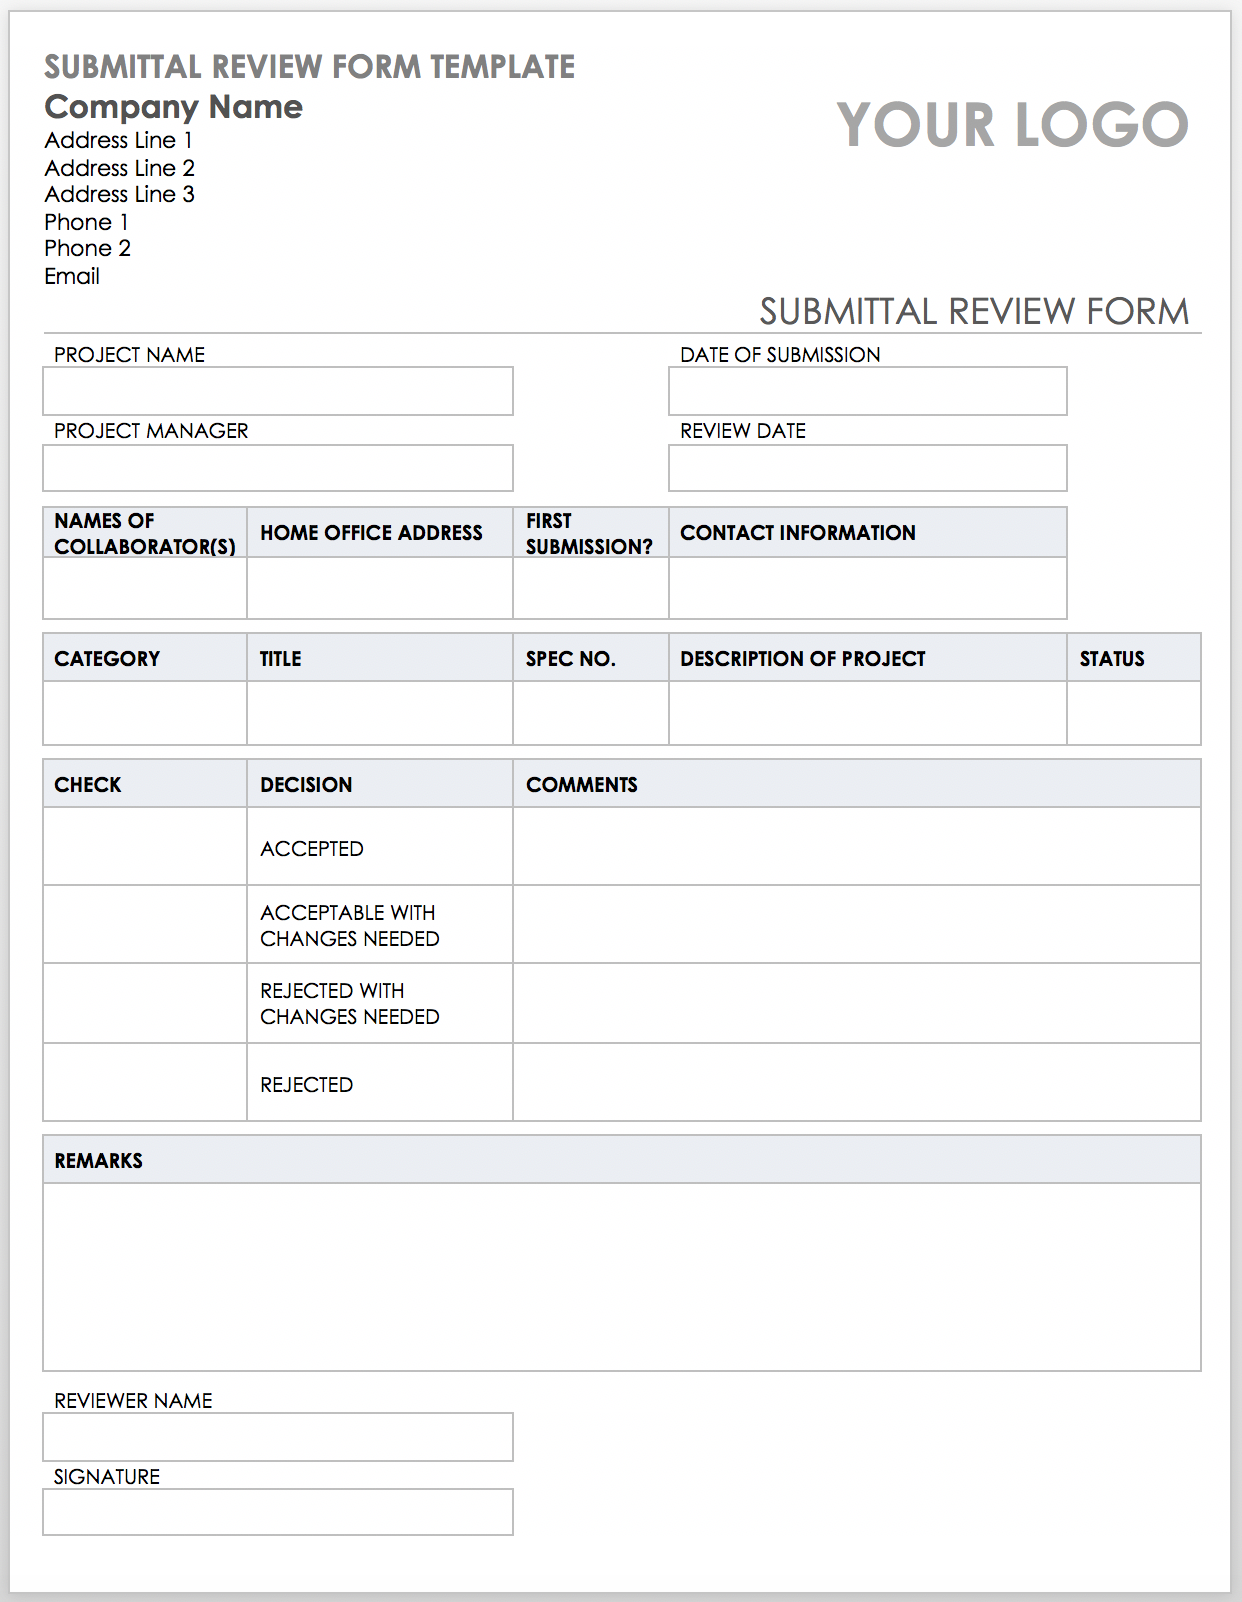 Submittal Review Form Template